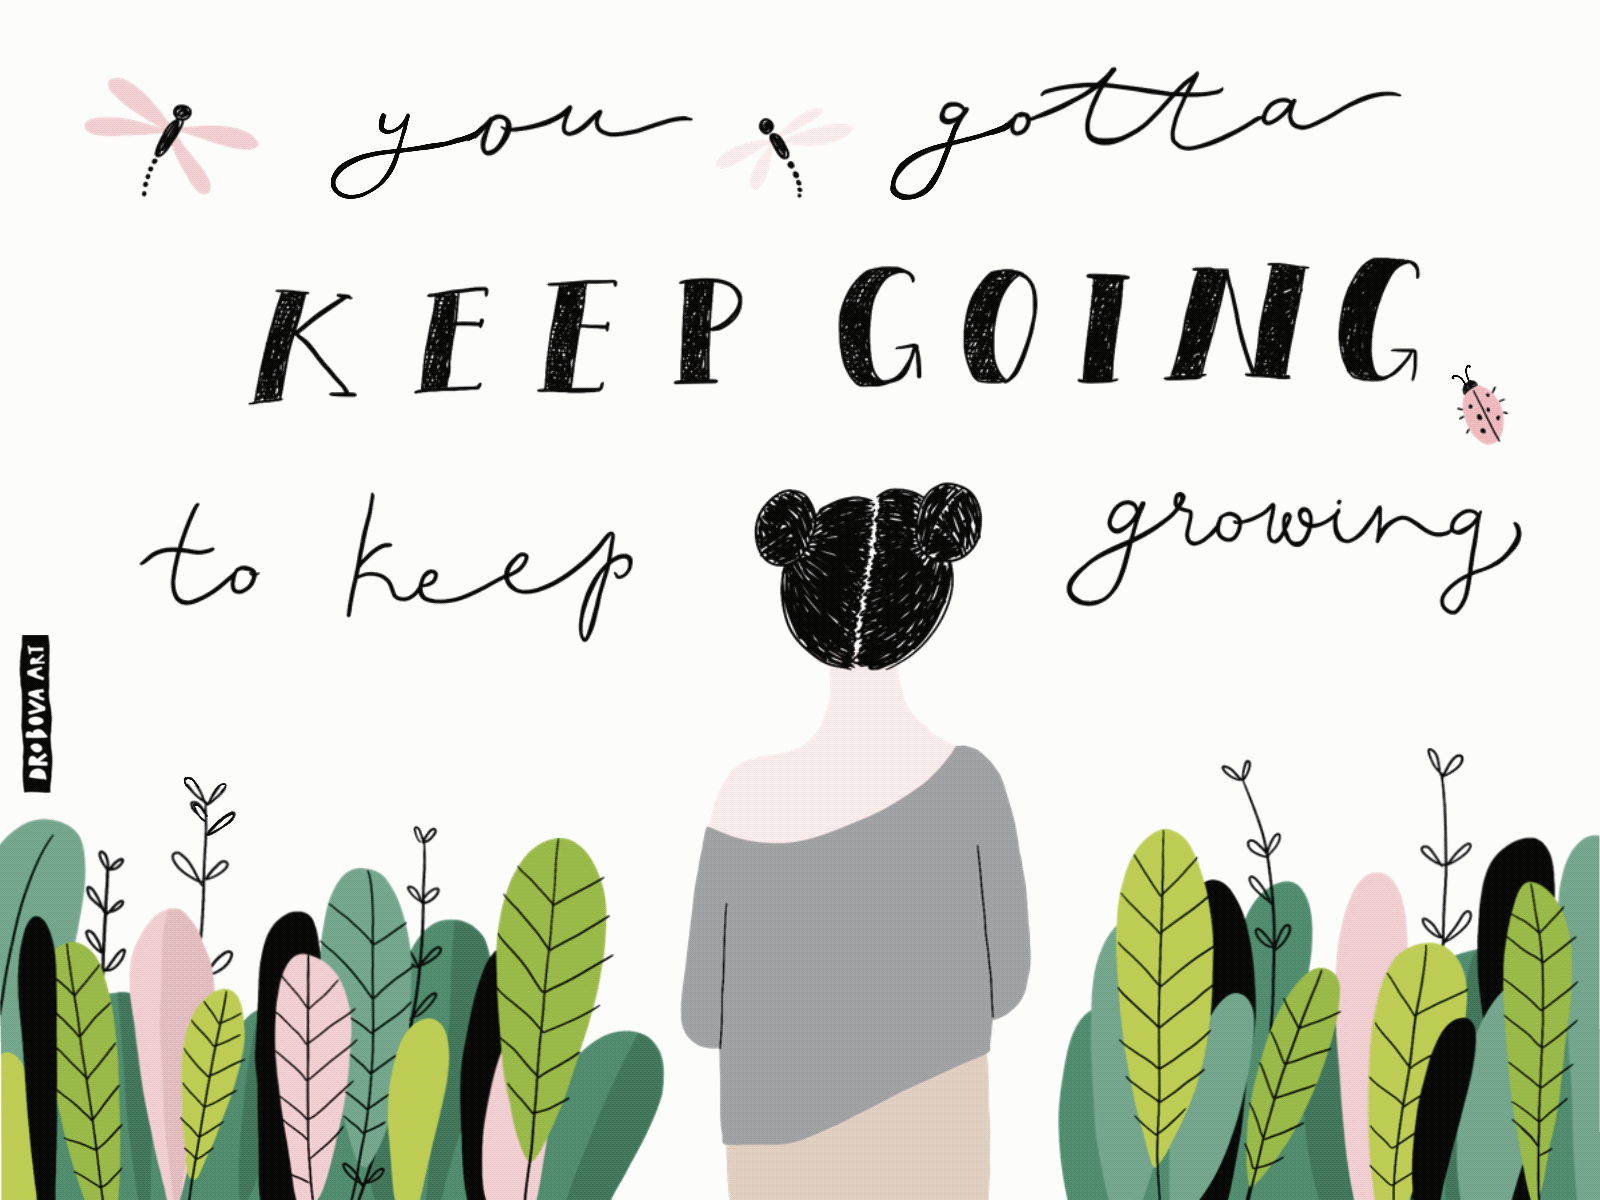 Just keep going.